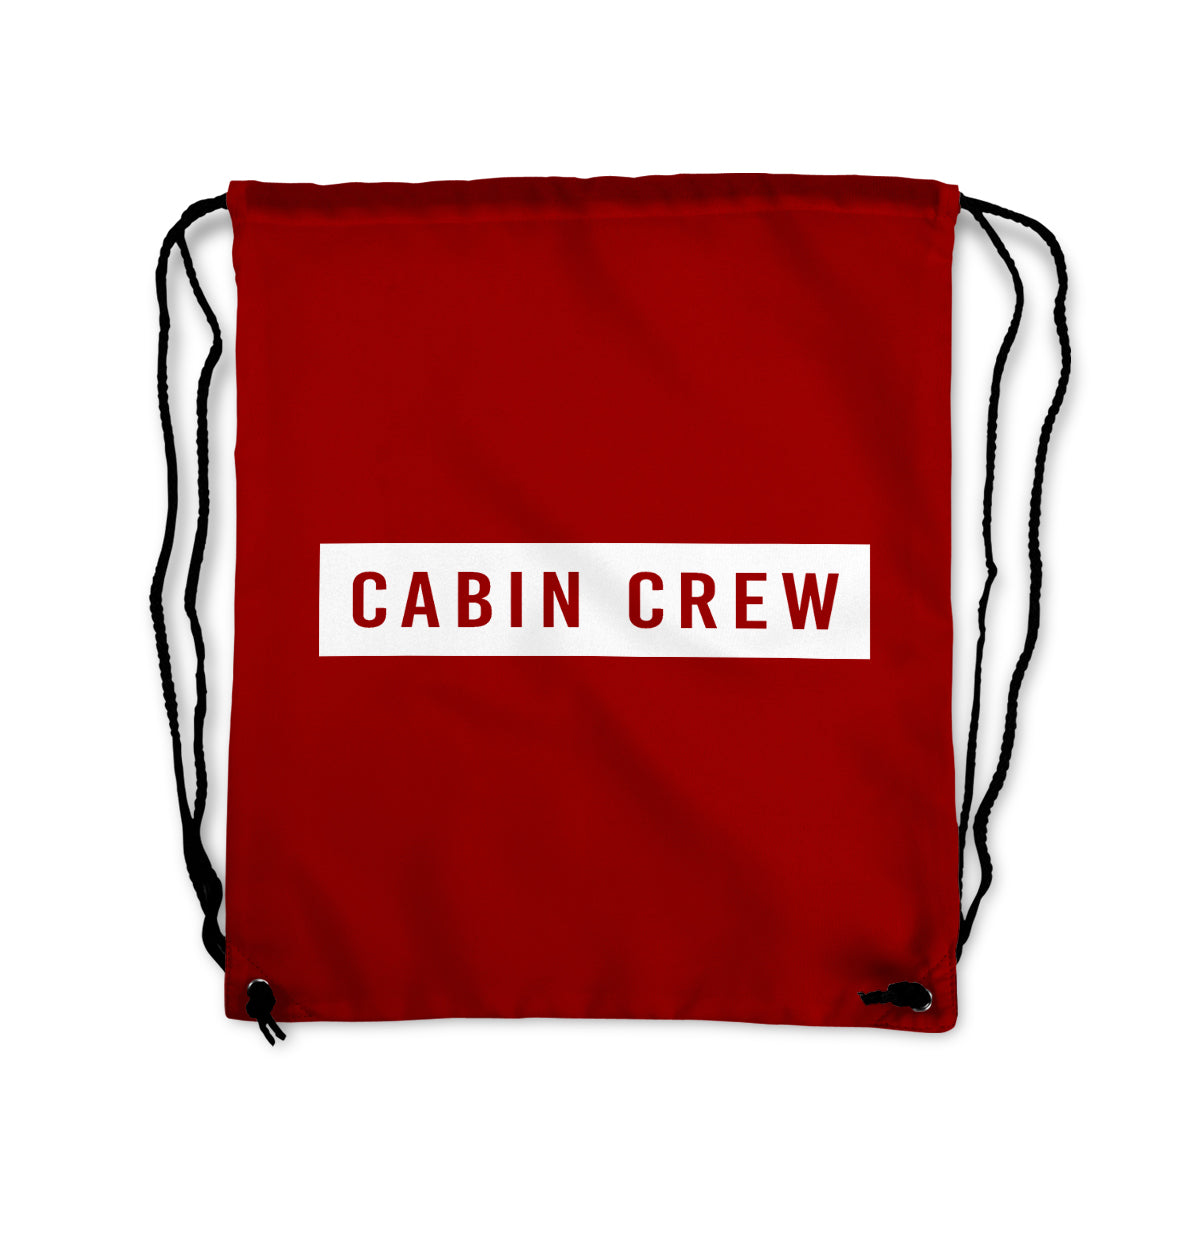 Cabin Crew Text Designed Drawstring Bags